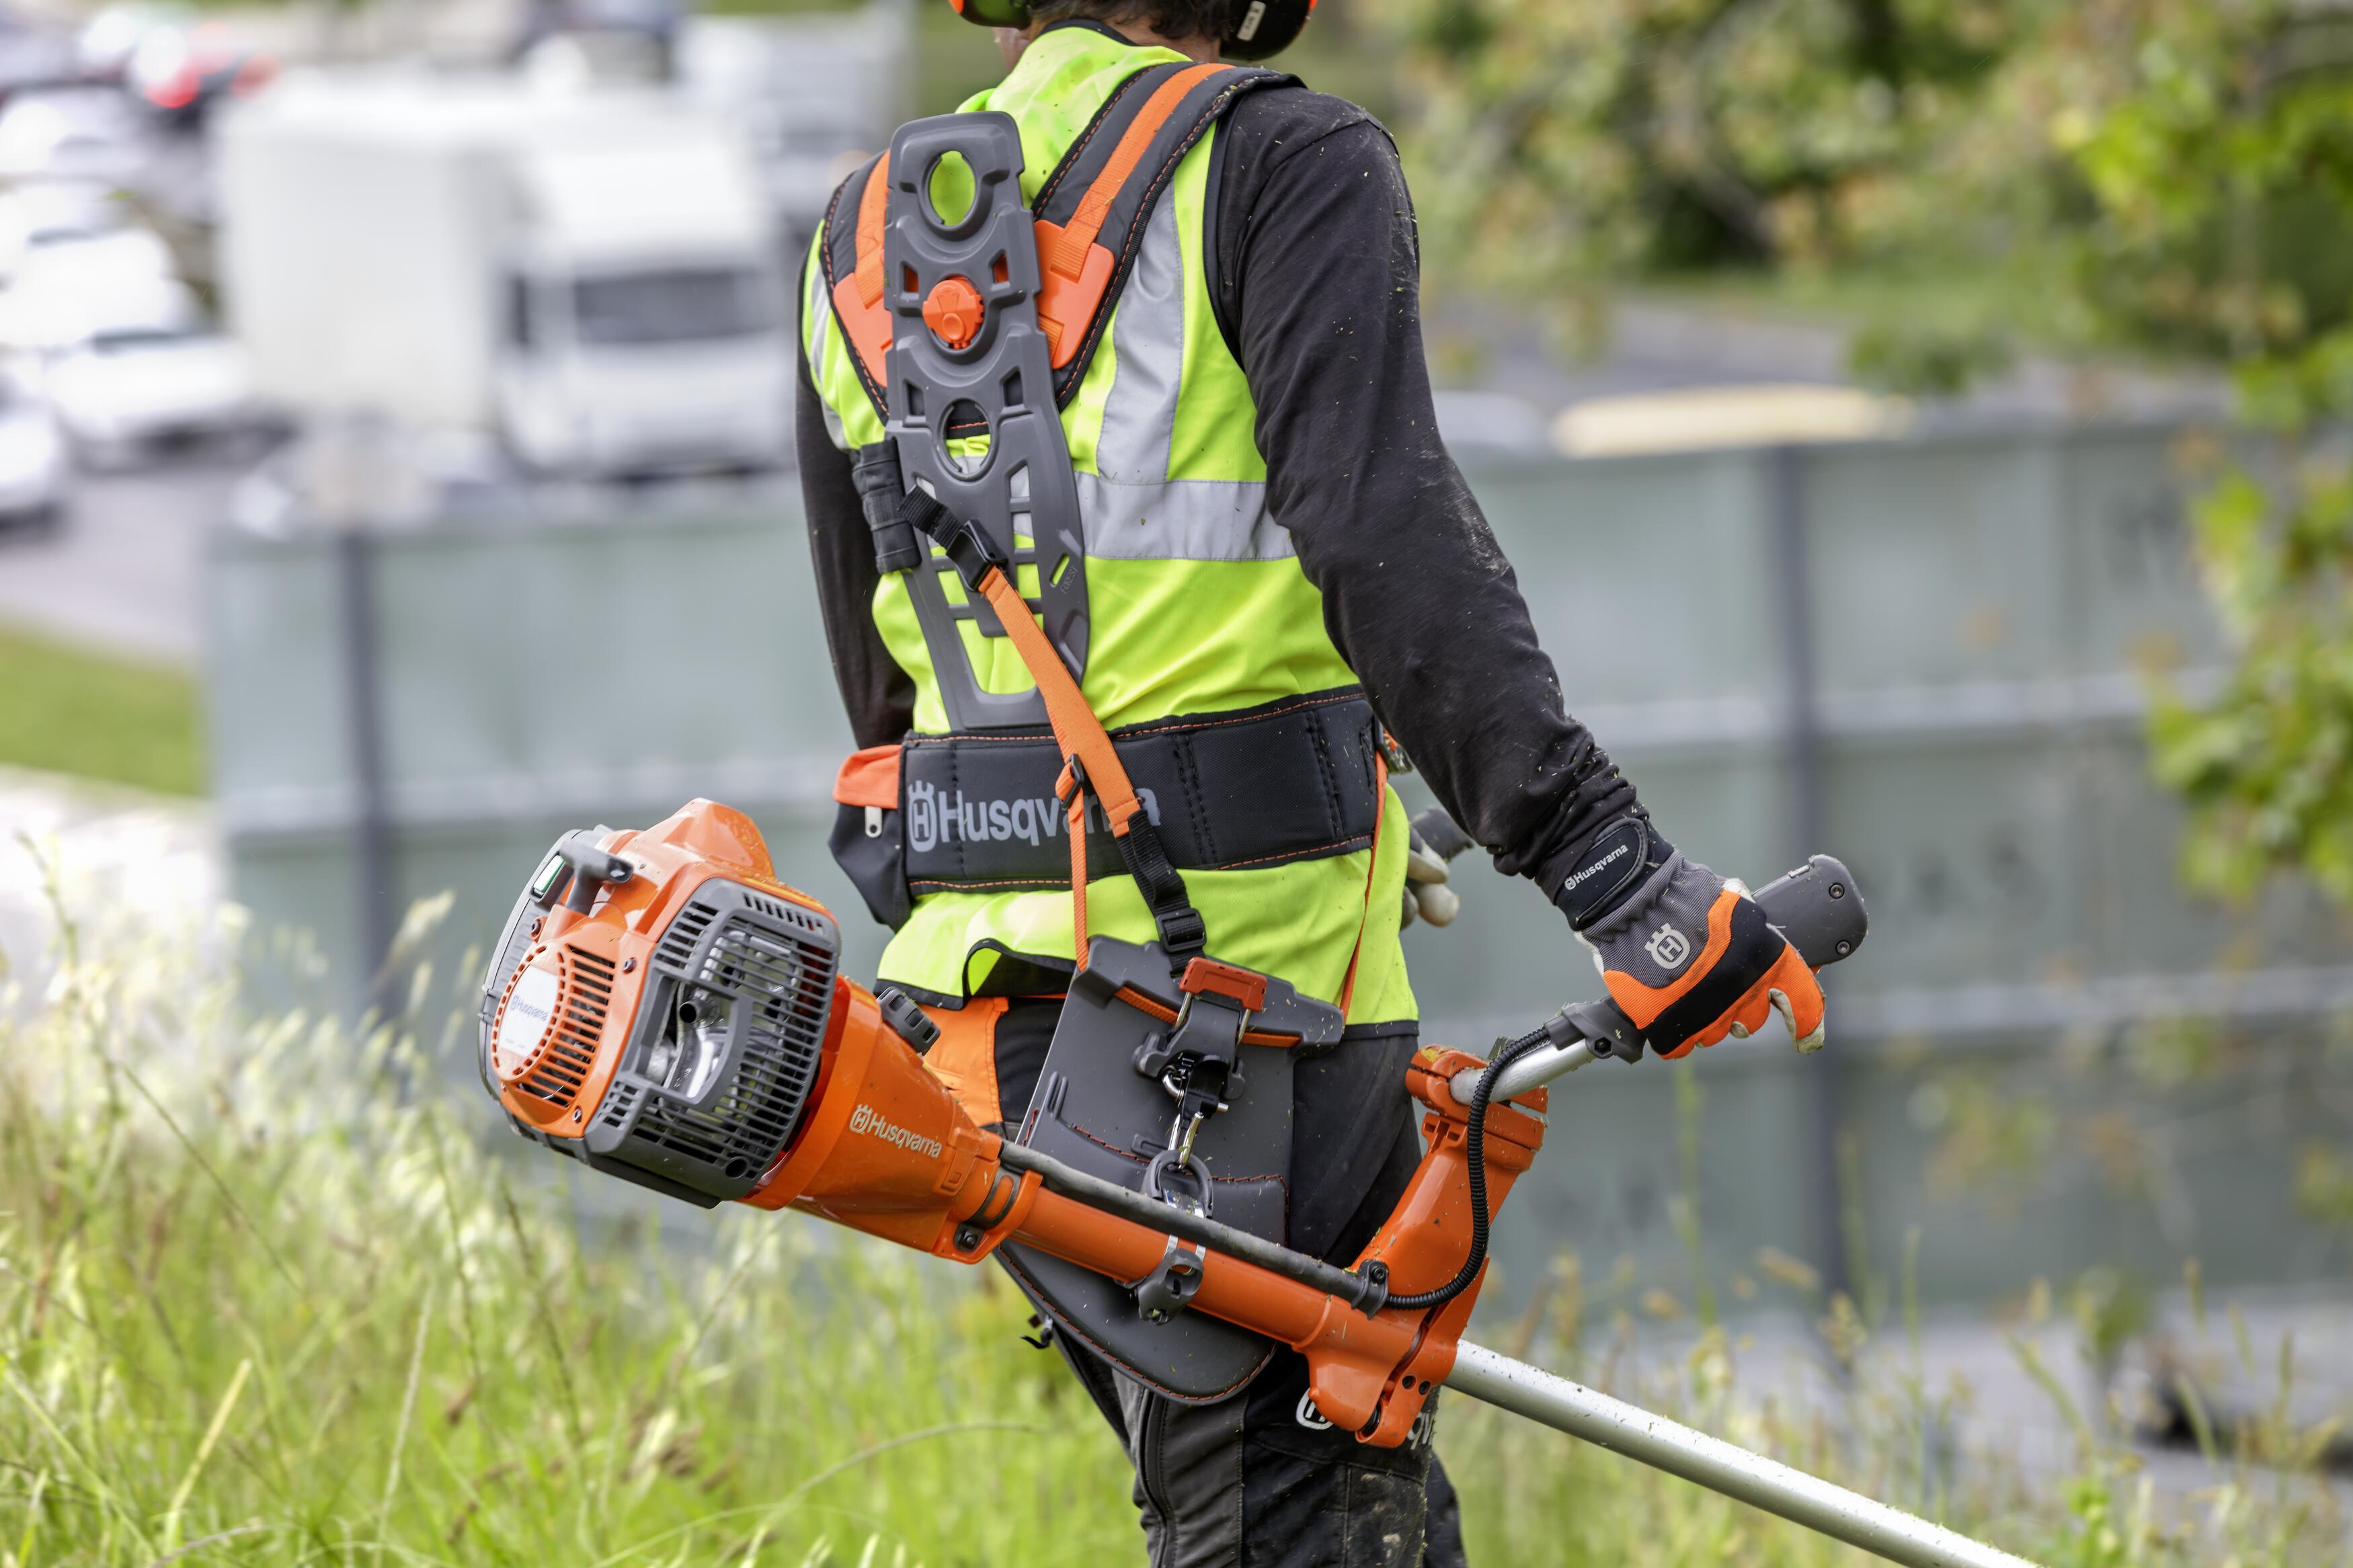 Ergonomic harnesses for the Husqvarna Forest Clearing Saw